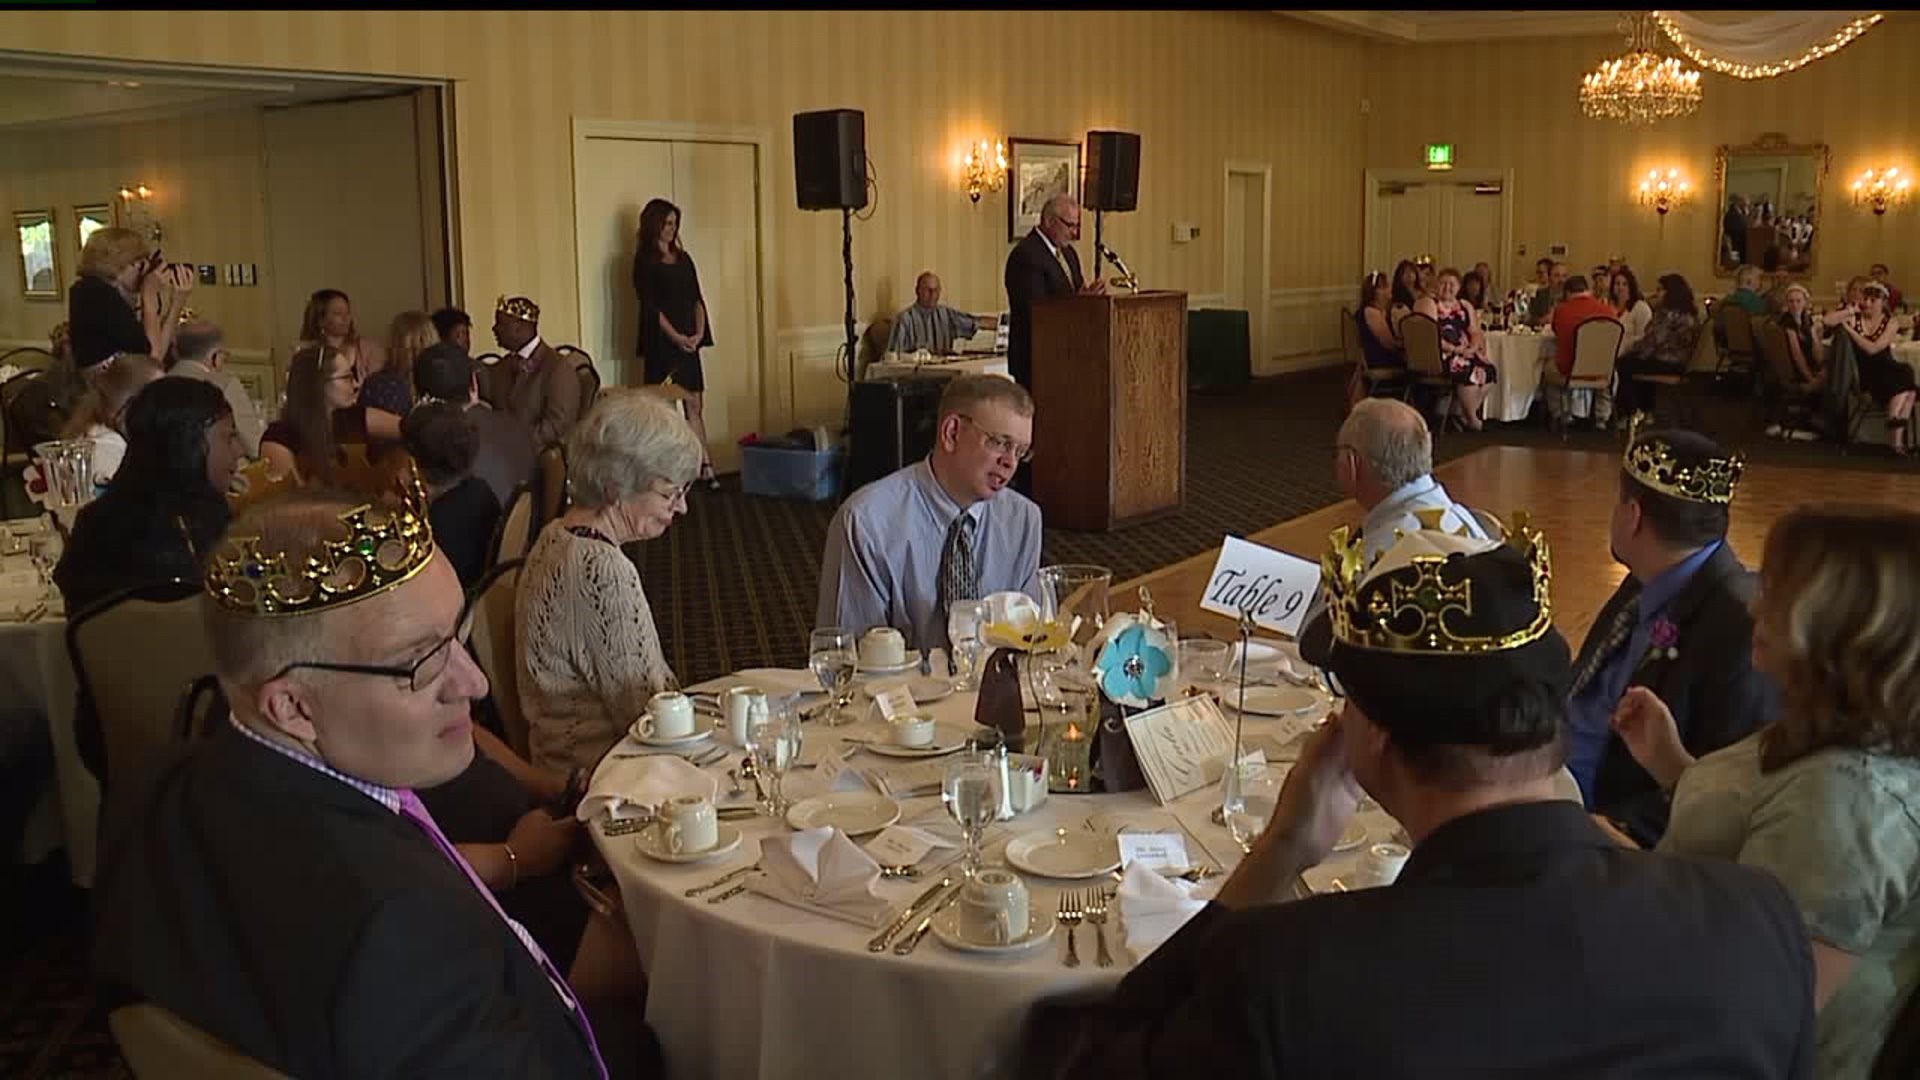 Jessica and Friends Community Gala celebrates dozens of people with special needs